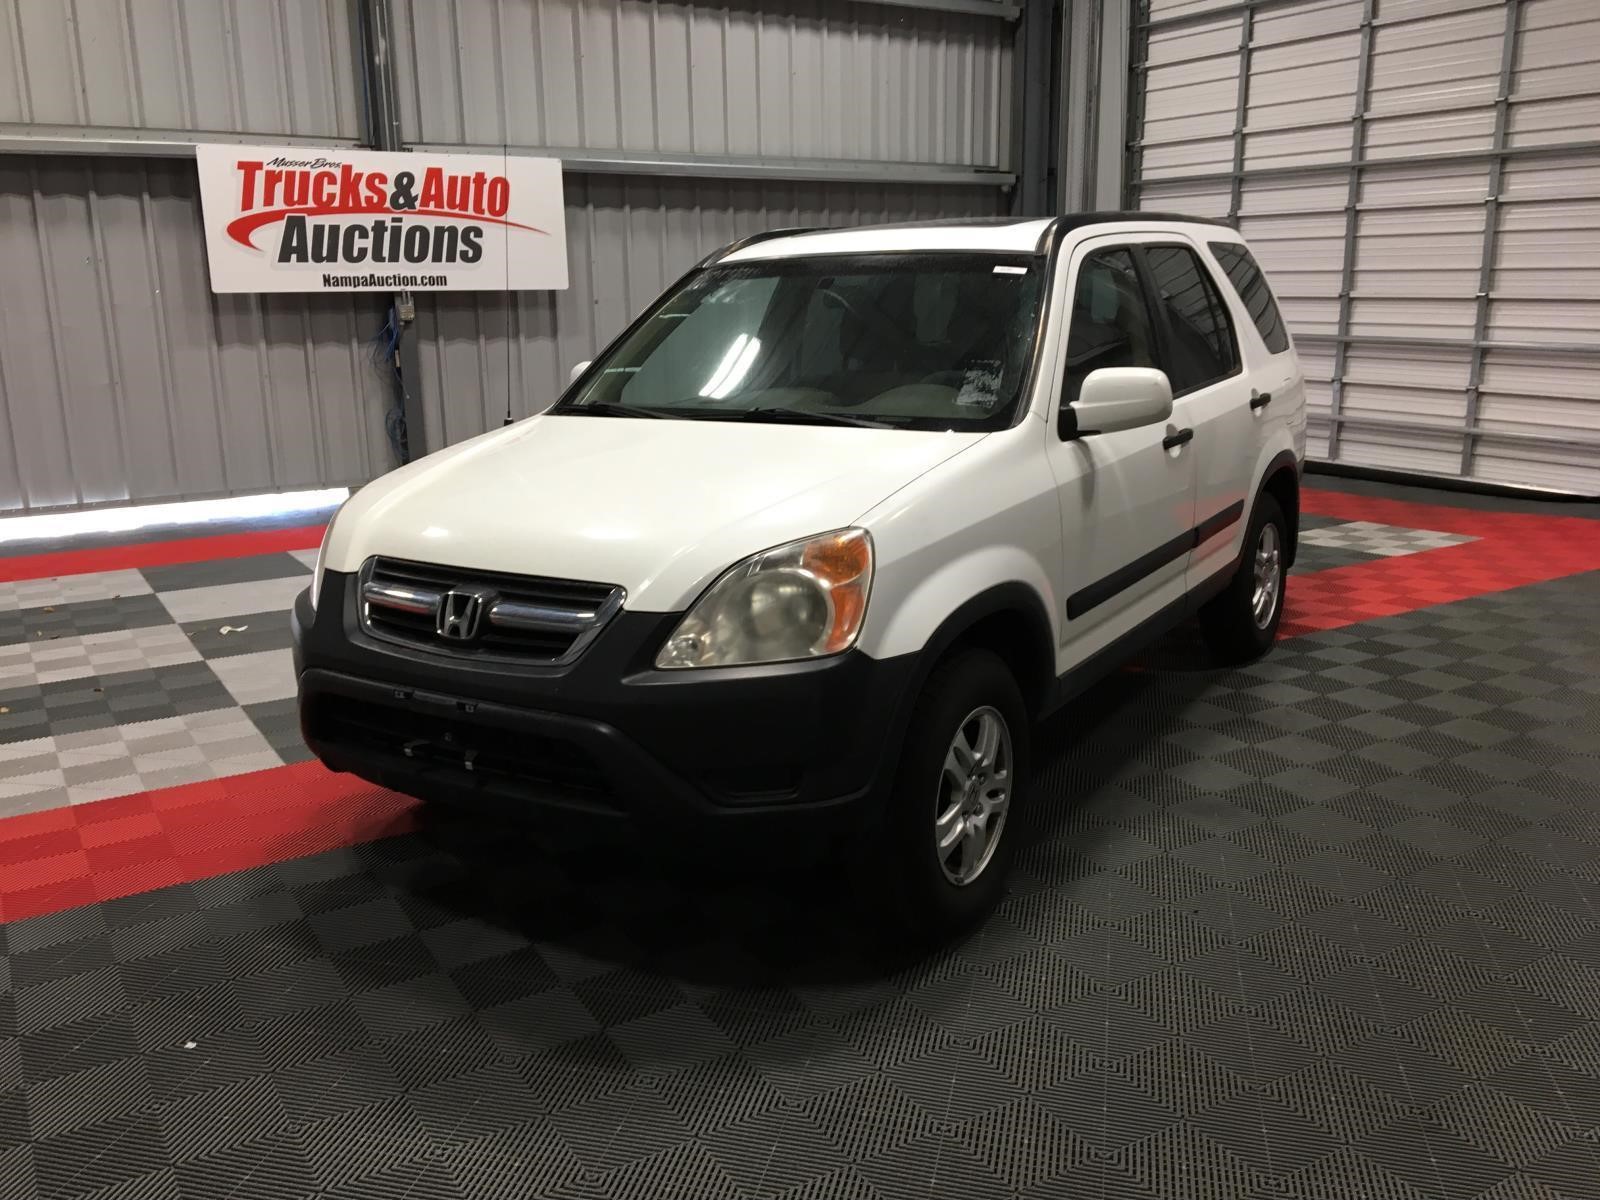 102617 Trucks & Auto Online Only Auction